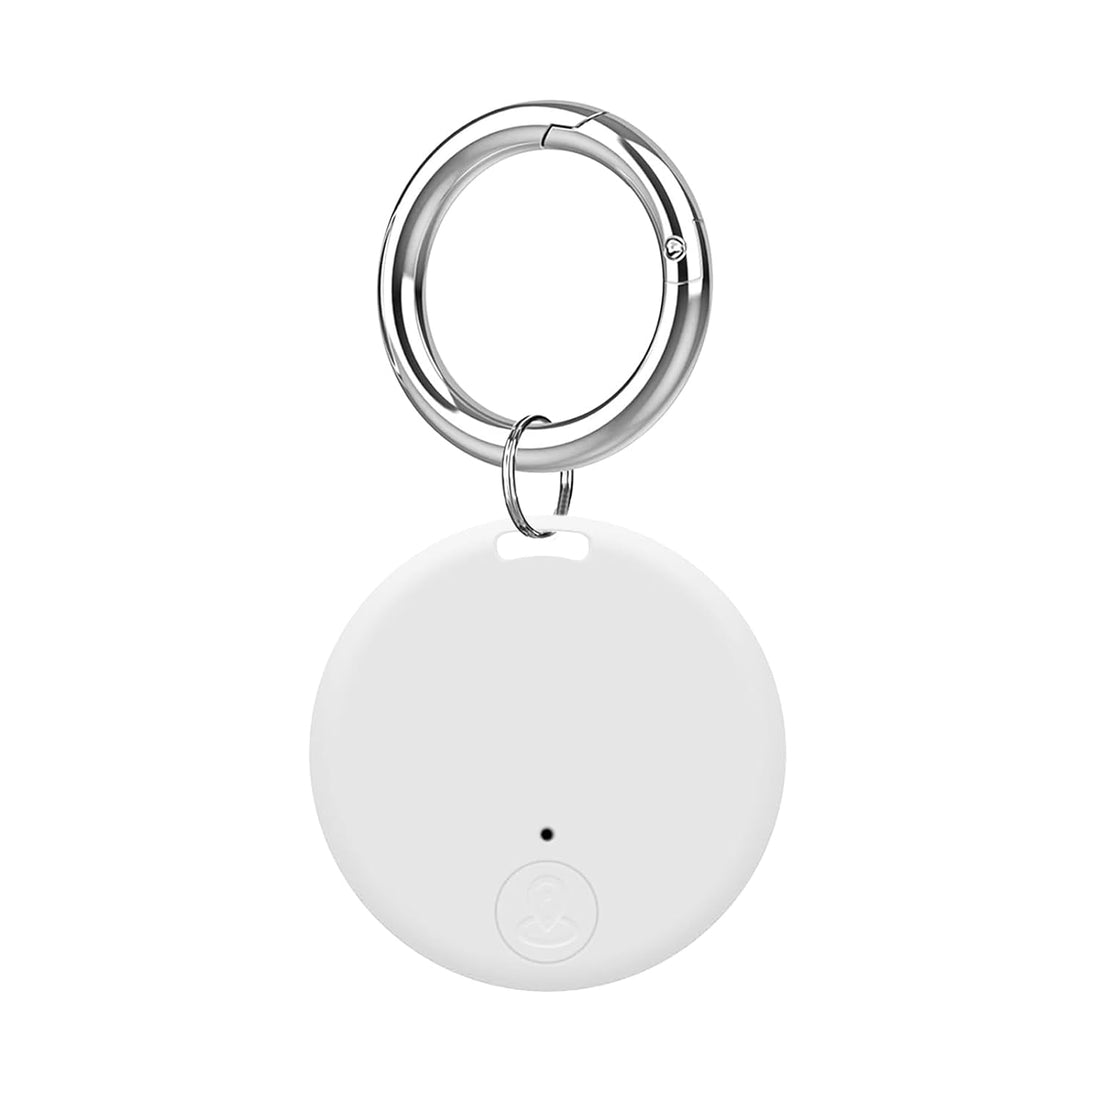 Aircawin Mini GPS Tracker Case,Key Item Finder Locator,No Monthly Fee App for iOS/Android 2023 Latest,Portable Anti-Lost Bluetooth Tag Item Tracker for Luggages/Kids/Pets/Phone/Wallet/Bag-1Pcs-Ivory